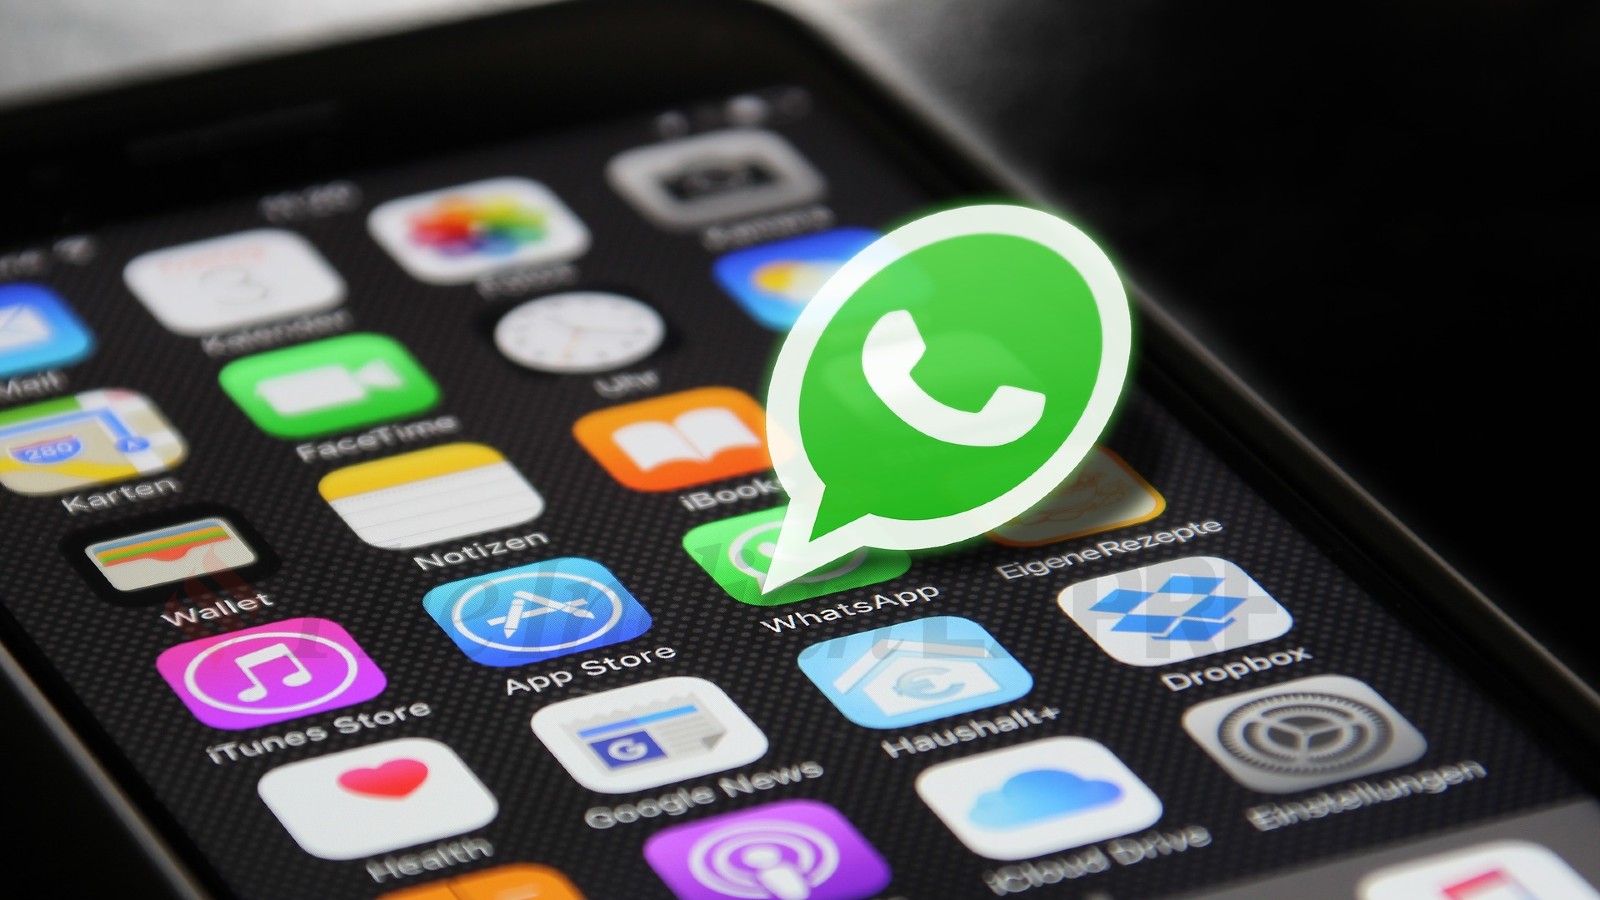 Beware: New WhatsApp scam can drain your bank accounts and lock you out of social media